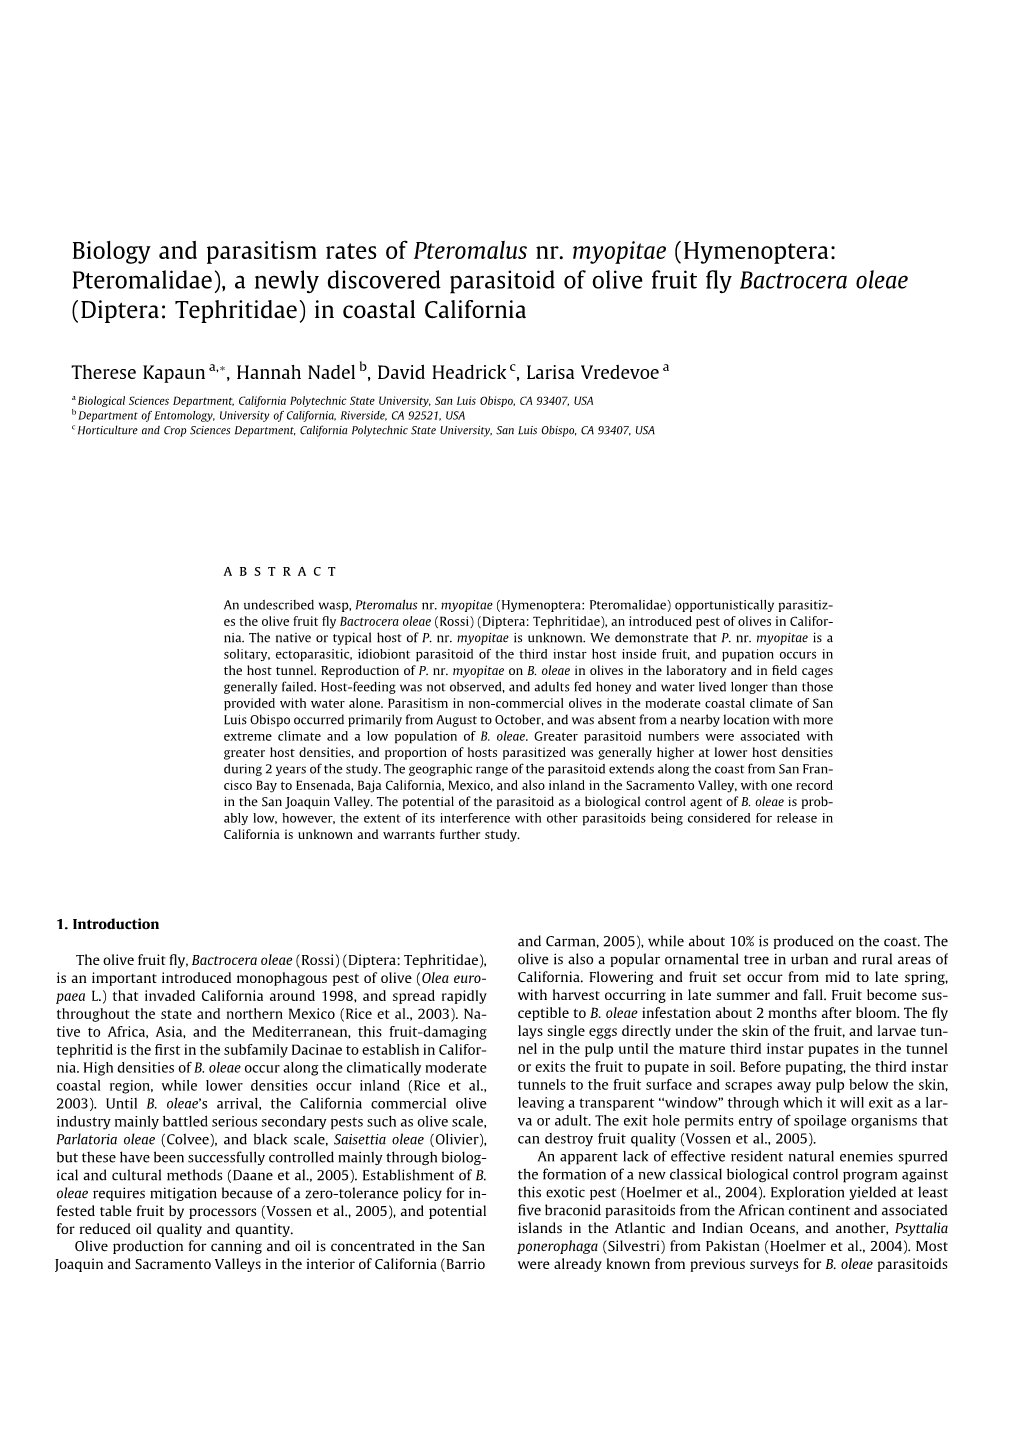 Biology and Parasitism Rates of Pteromalus Nr. Myopitae